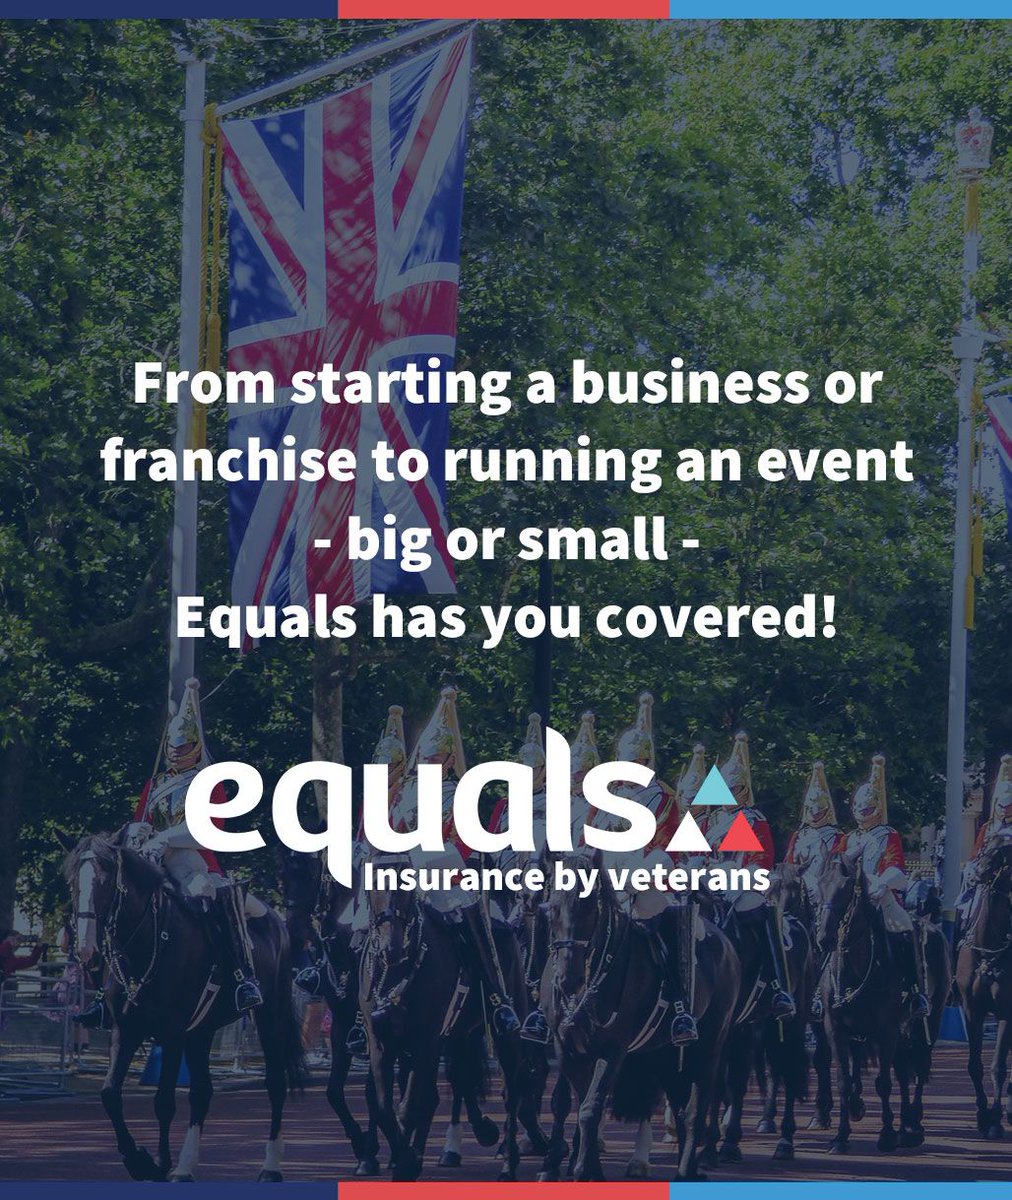 Get your quote online for insurance to cover your business, franchise or event. Equals has you covered!

bit.ly/2PzFXYF

#insurancecoverage #equalsinsurance #businesscoverage #eventcoverage #franchisecoverage